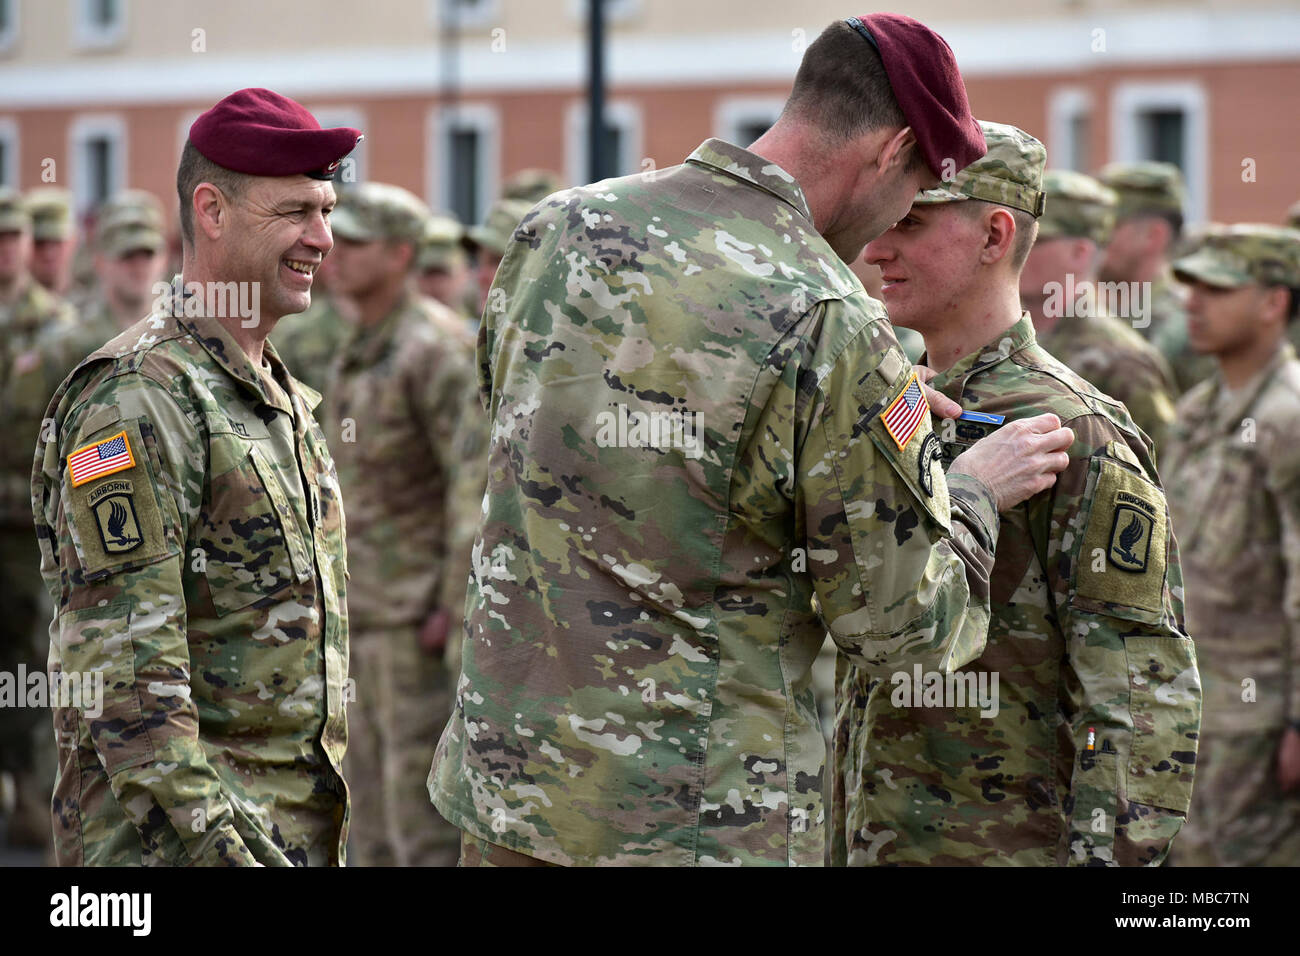 Col. James B. Bartholomees III, Commander of the 173rd Airborne Brigade (right) and Command Sgt. Maj. Franklin Velez of the 173rd Airborne Brigade (left), pins the Expert Infantryman Badge (EIB) on a Paratrooper assigned to the 173rd Airborne Brigade during the Expert Infantryman Badge (EIB) ceremony at Caserma Del Din, Vicenza, Italy, 15 Feb. 2018. (U.S. Army Stock Photo